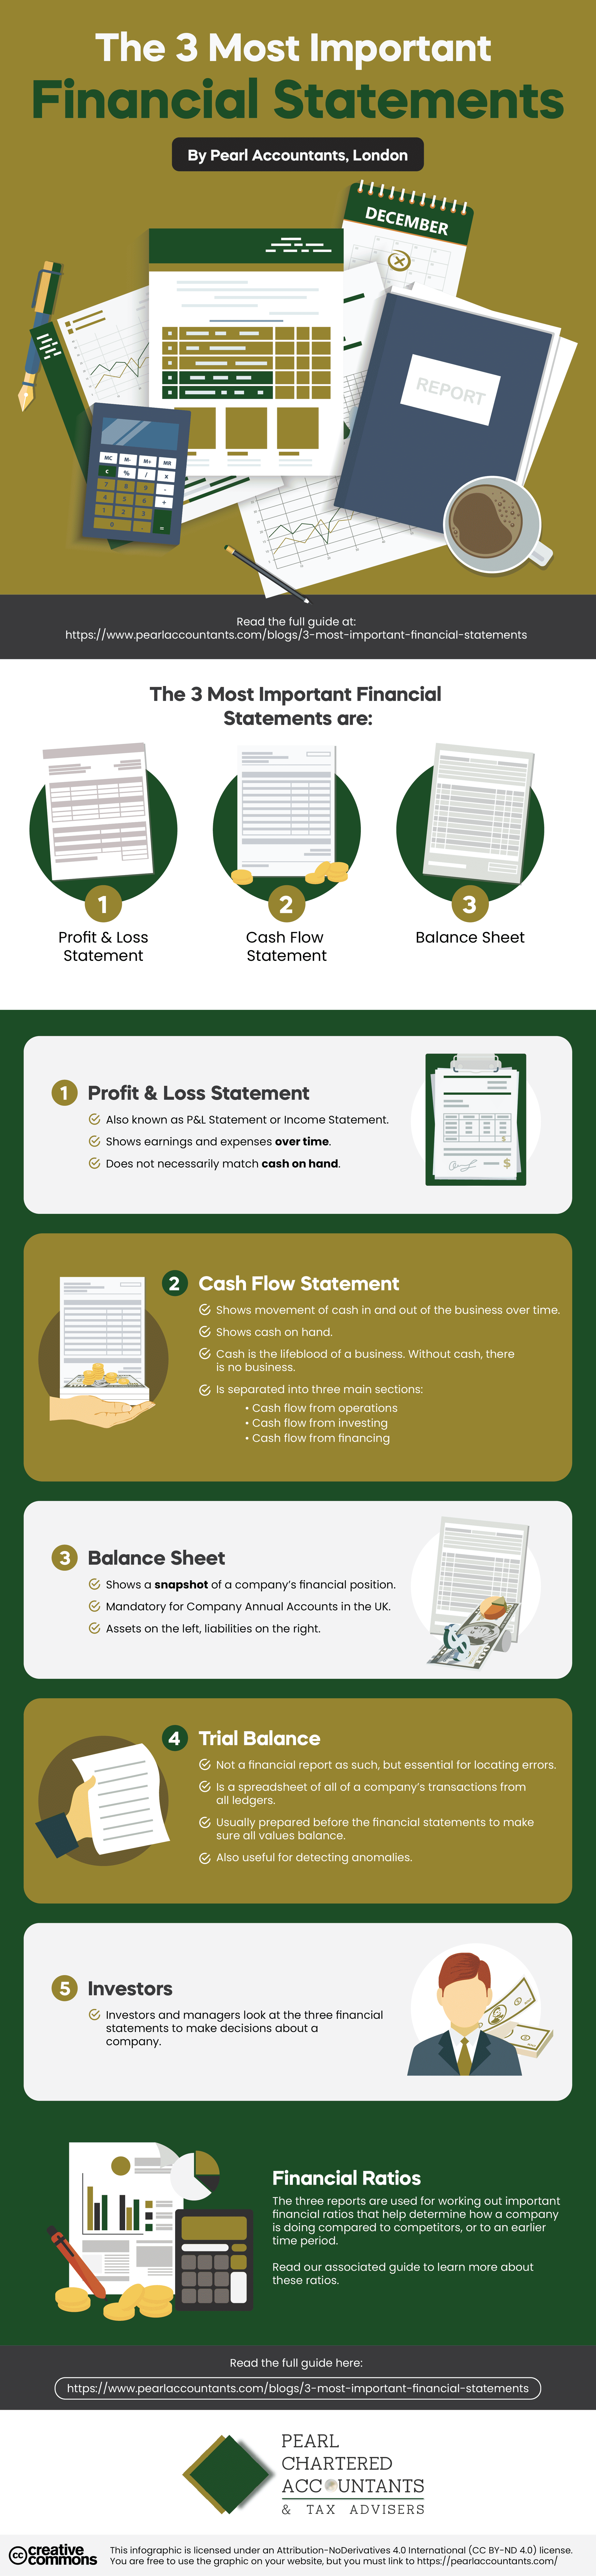 The 3 Most Important Financial Statements: Everything You Need to Know